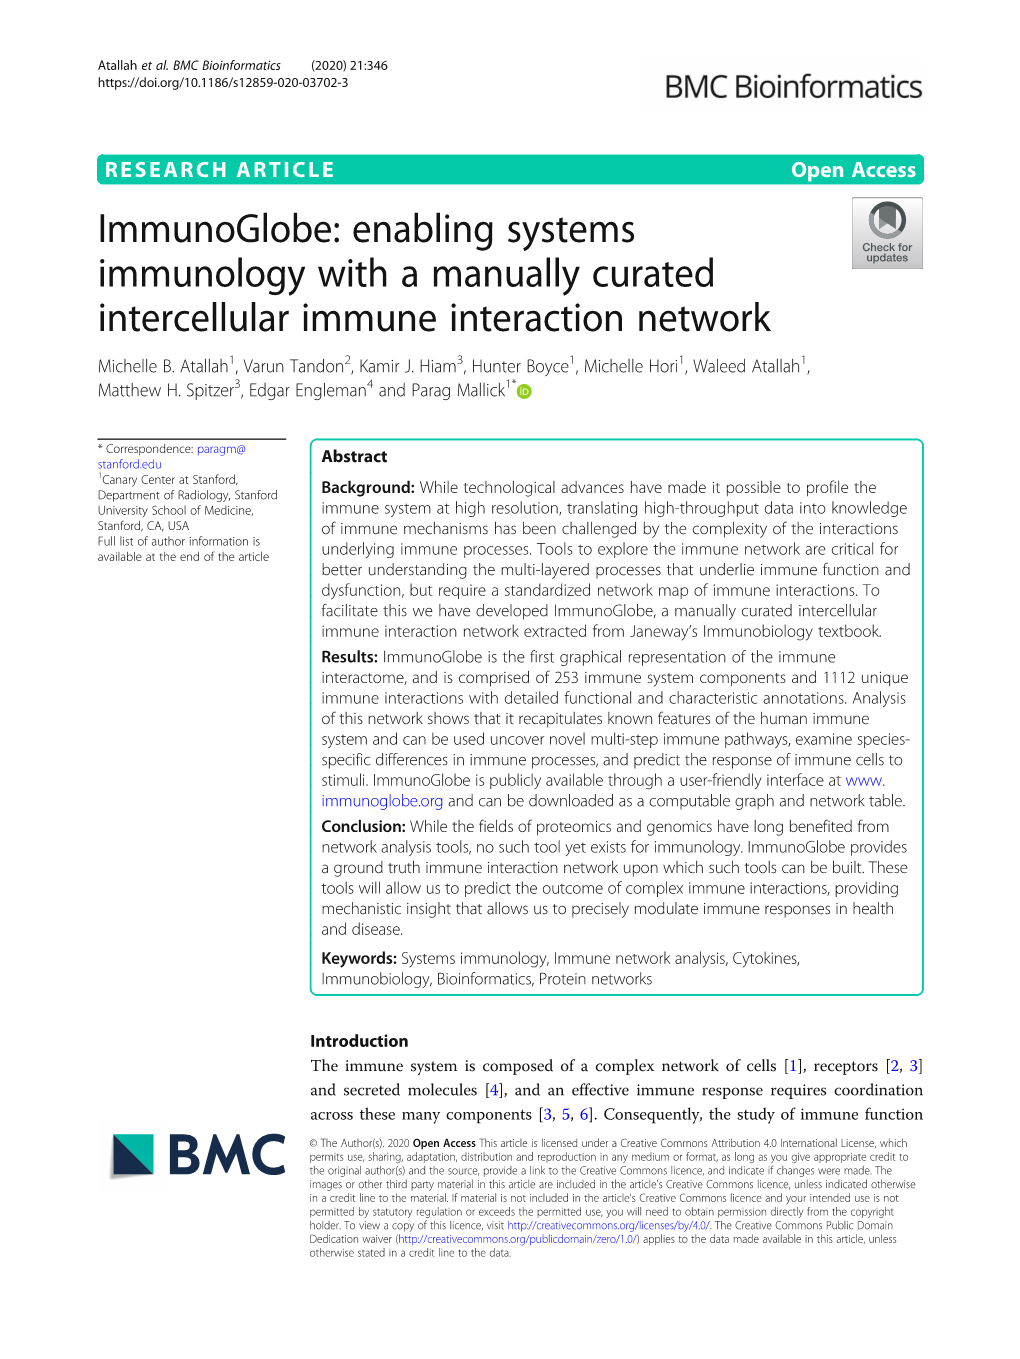 Immunoglobe: Enabling Systems Immunology with a Manually Curated Intercellular Immune Interaction Network Michelle B